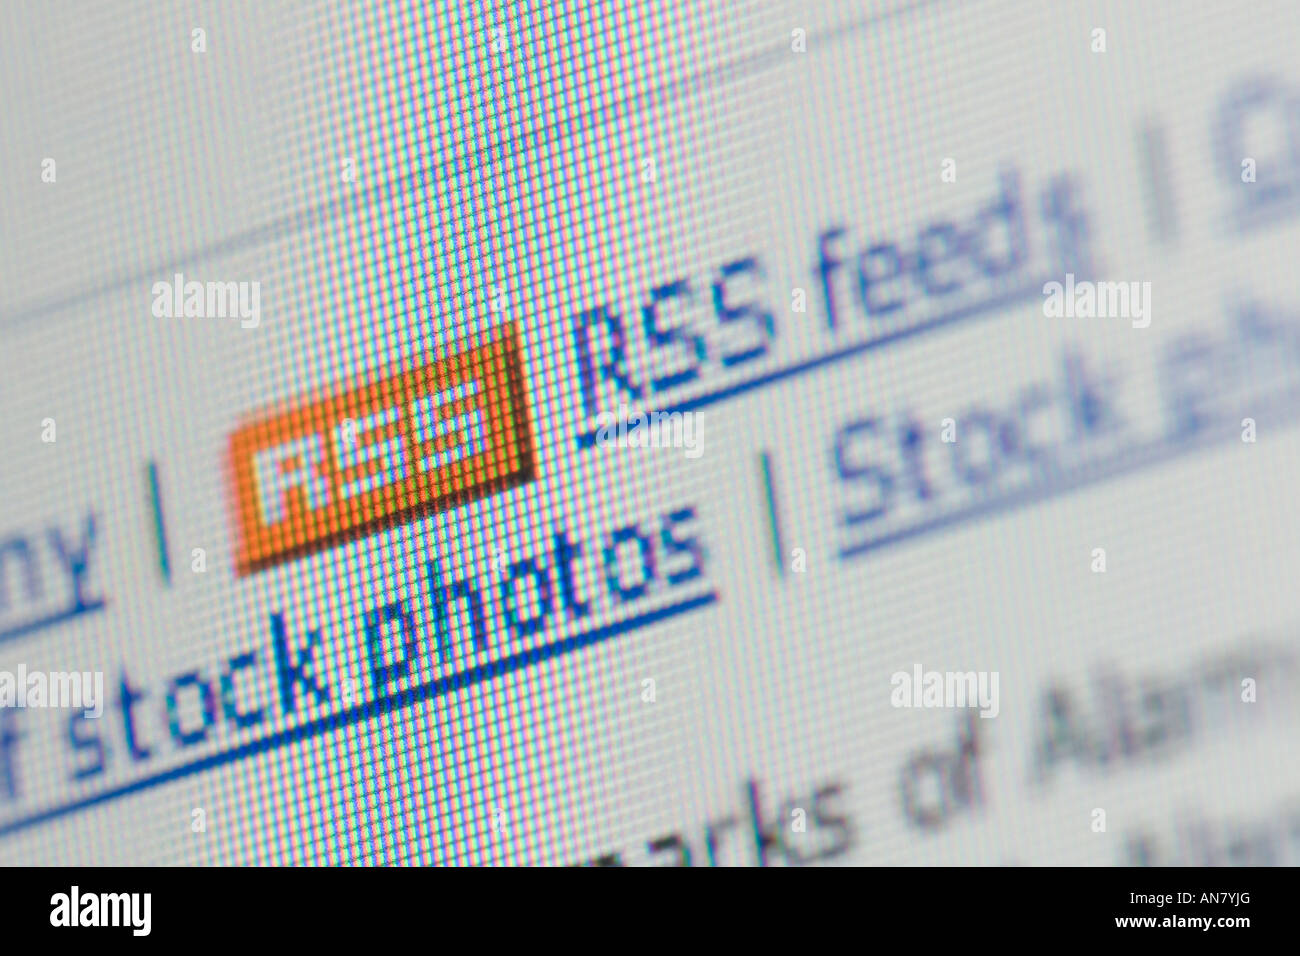 Computer screen shot extreme close up of RSS Feed logo and wording Stock Photo